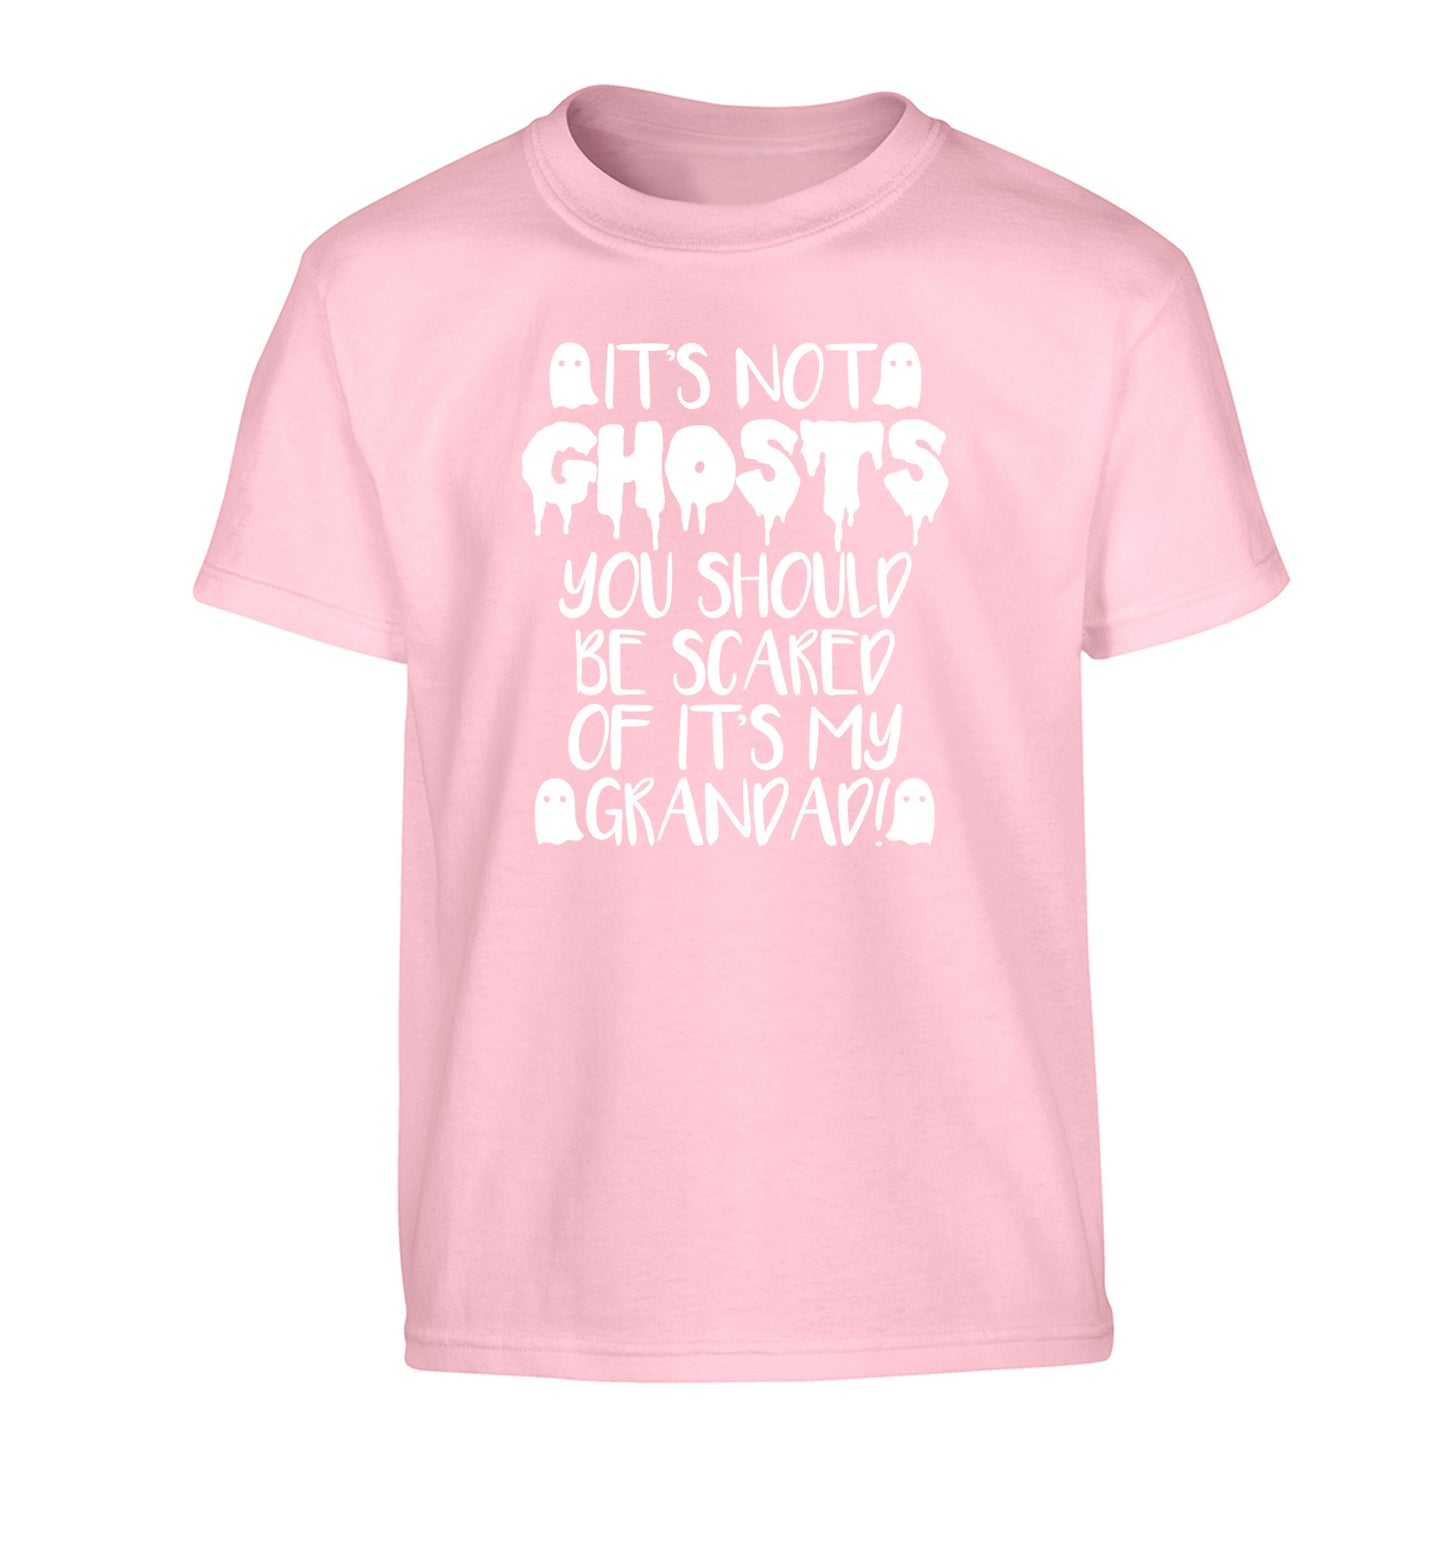 It's not ghosts you should be scared of it's my grandad! Children's light pink Tshirt 12-14 Years